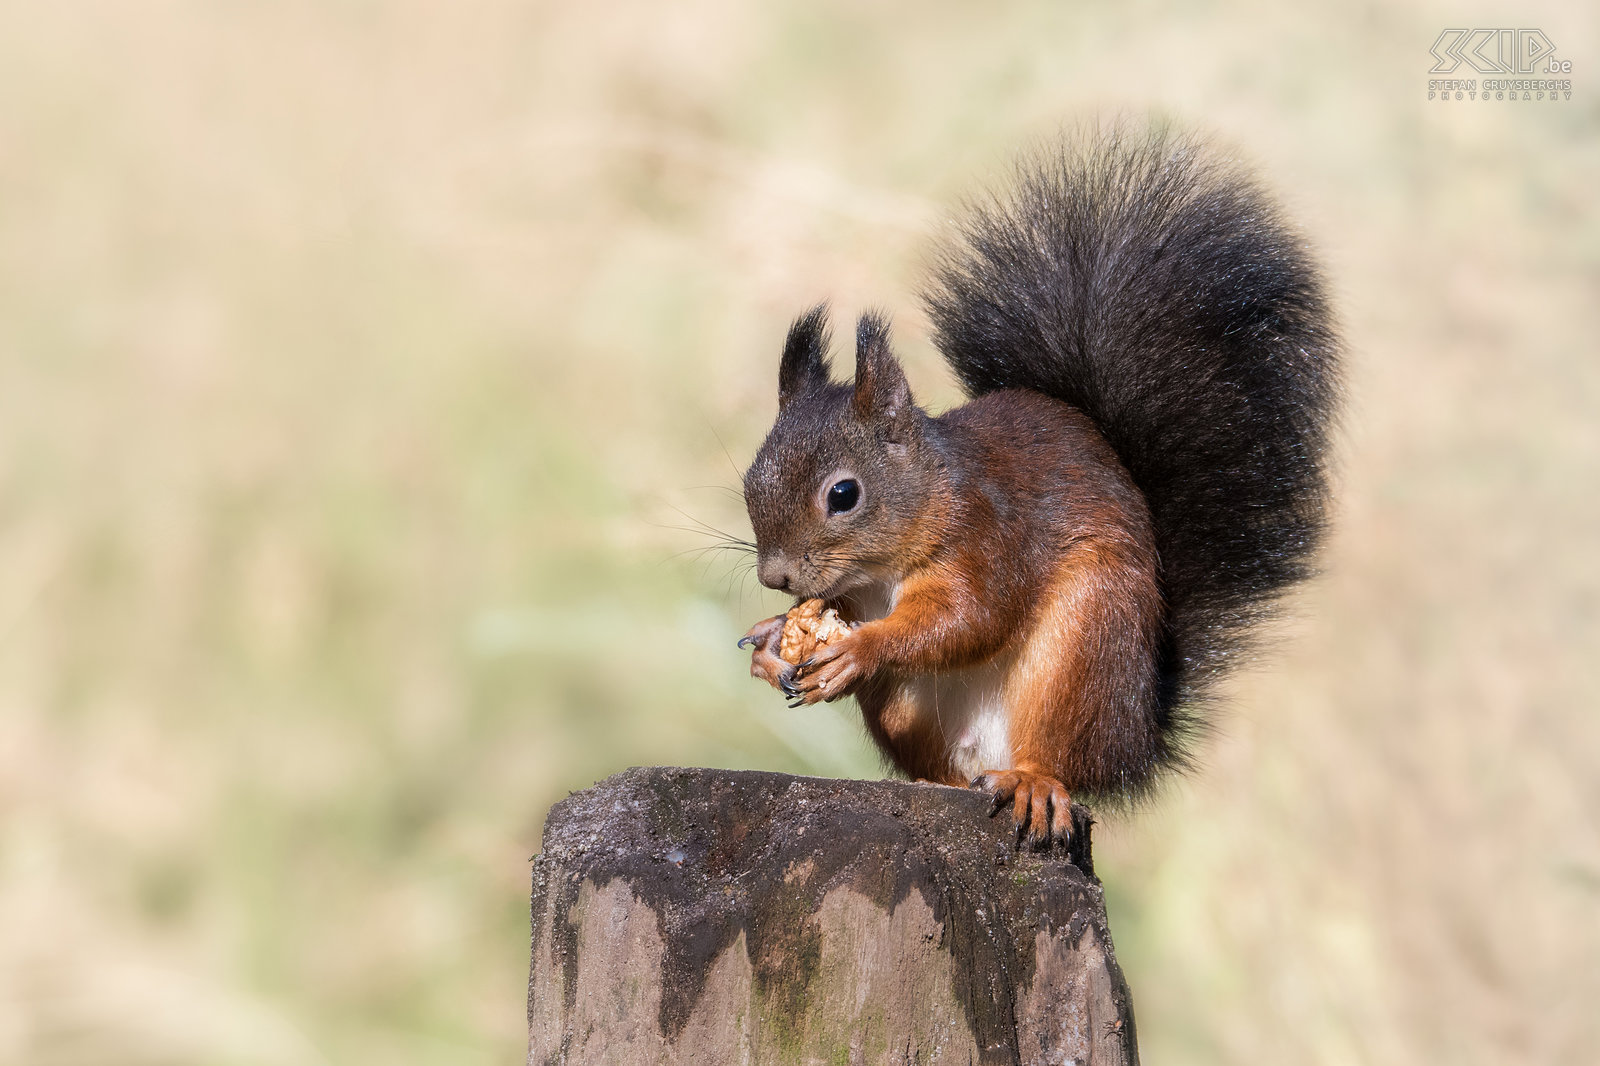 Red squirrel with black tail The most common squirrel in Western Europe is the red squirrel (Sciurus vulgaris) but their color can vary from reddish brown to gray or black. The lower abdomen is white. Stefan Cruysberghs